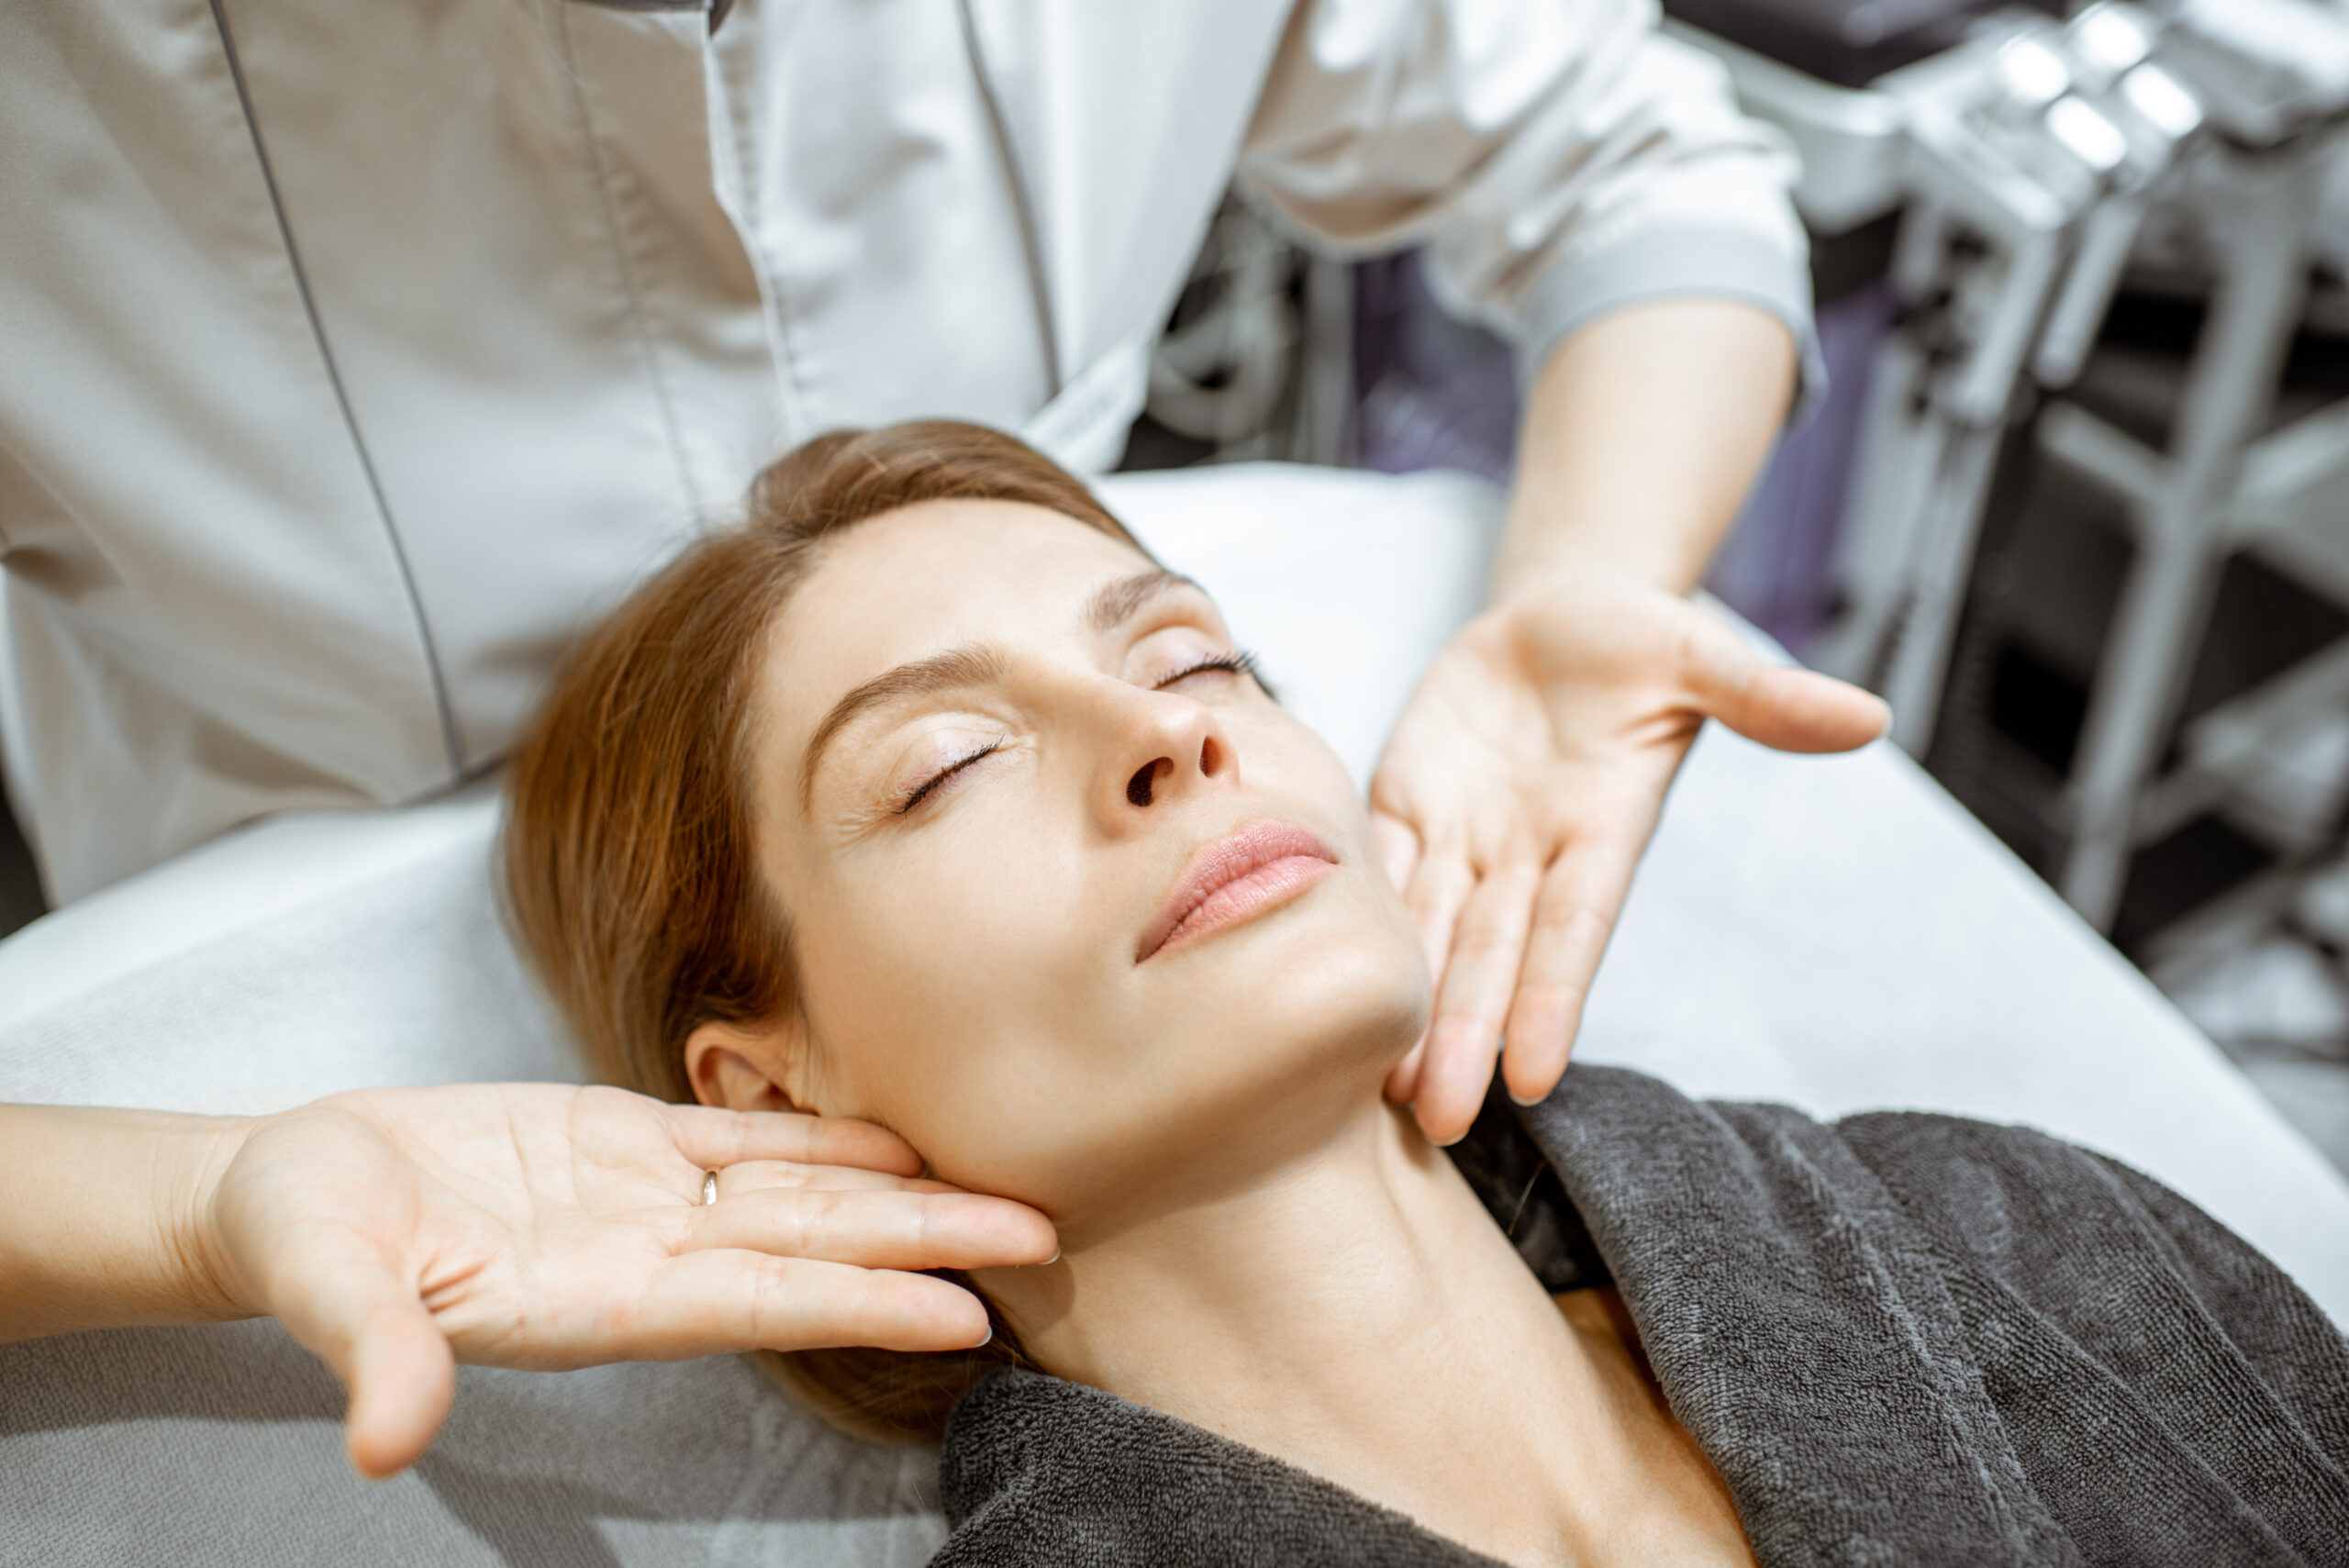 Woman during the facial massage at the beaty salon